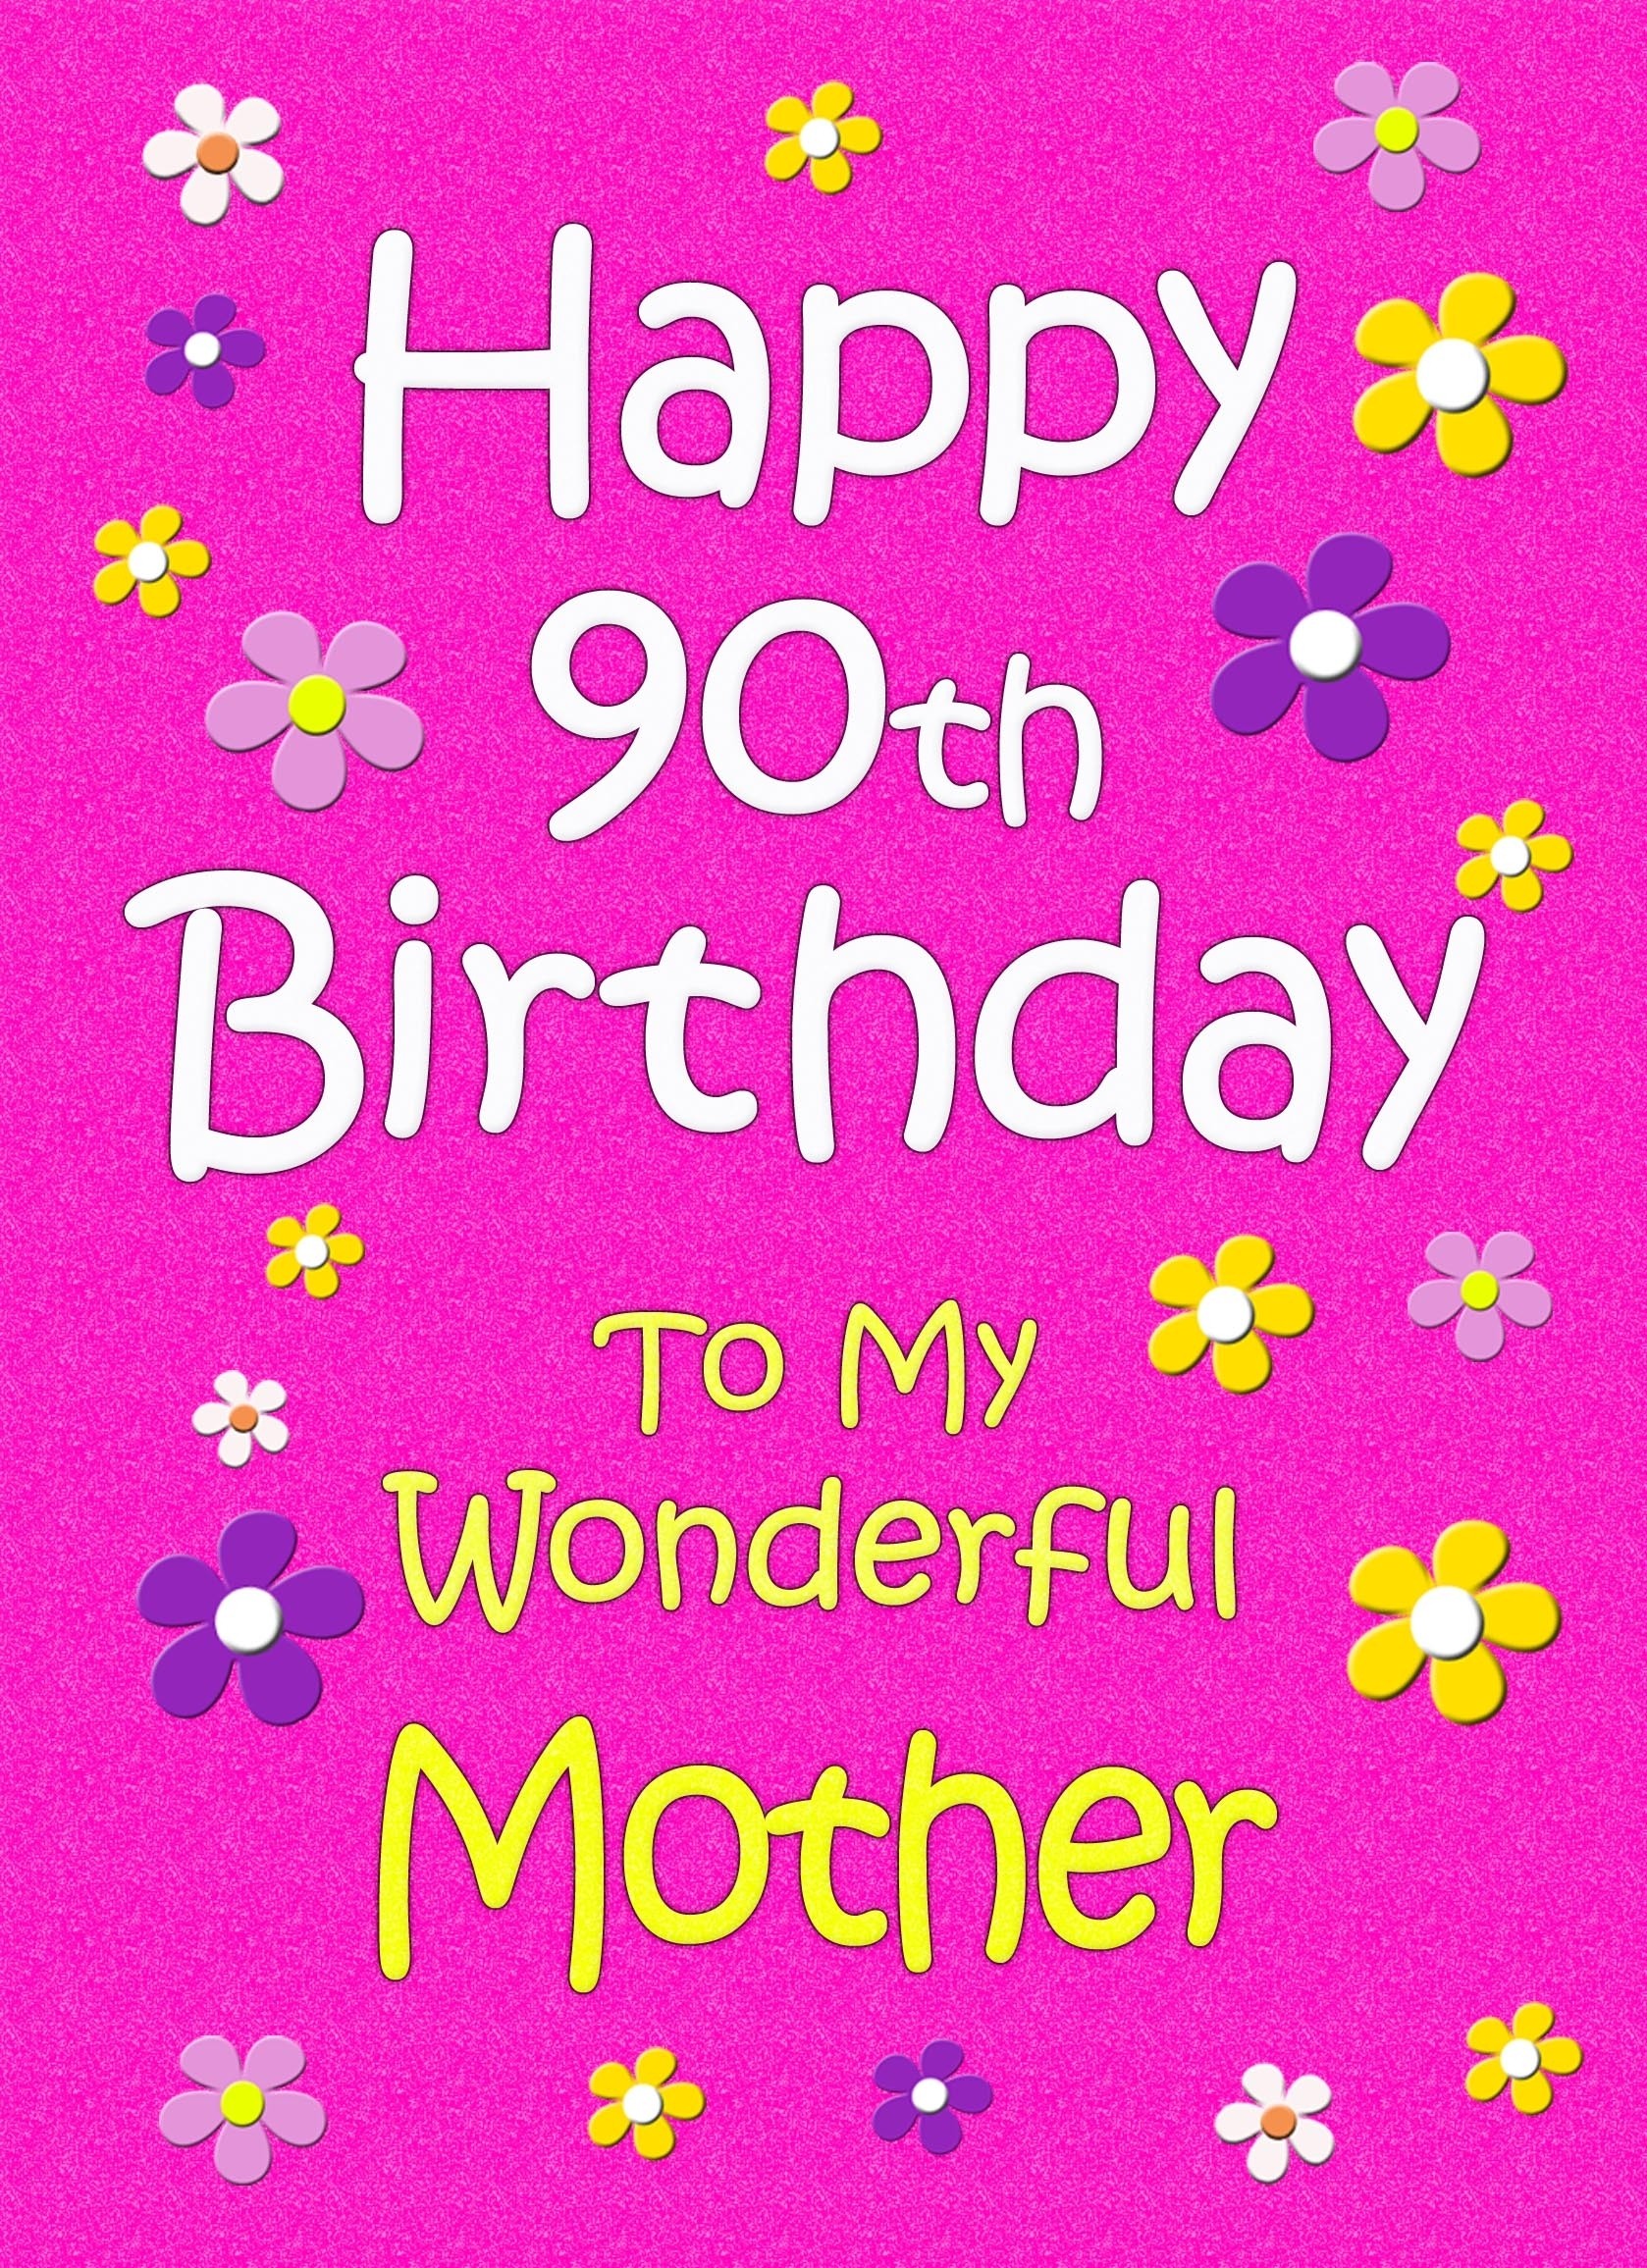 Mother 90th Birthday Card (Pink)